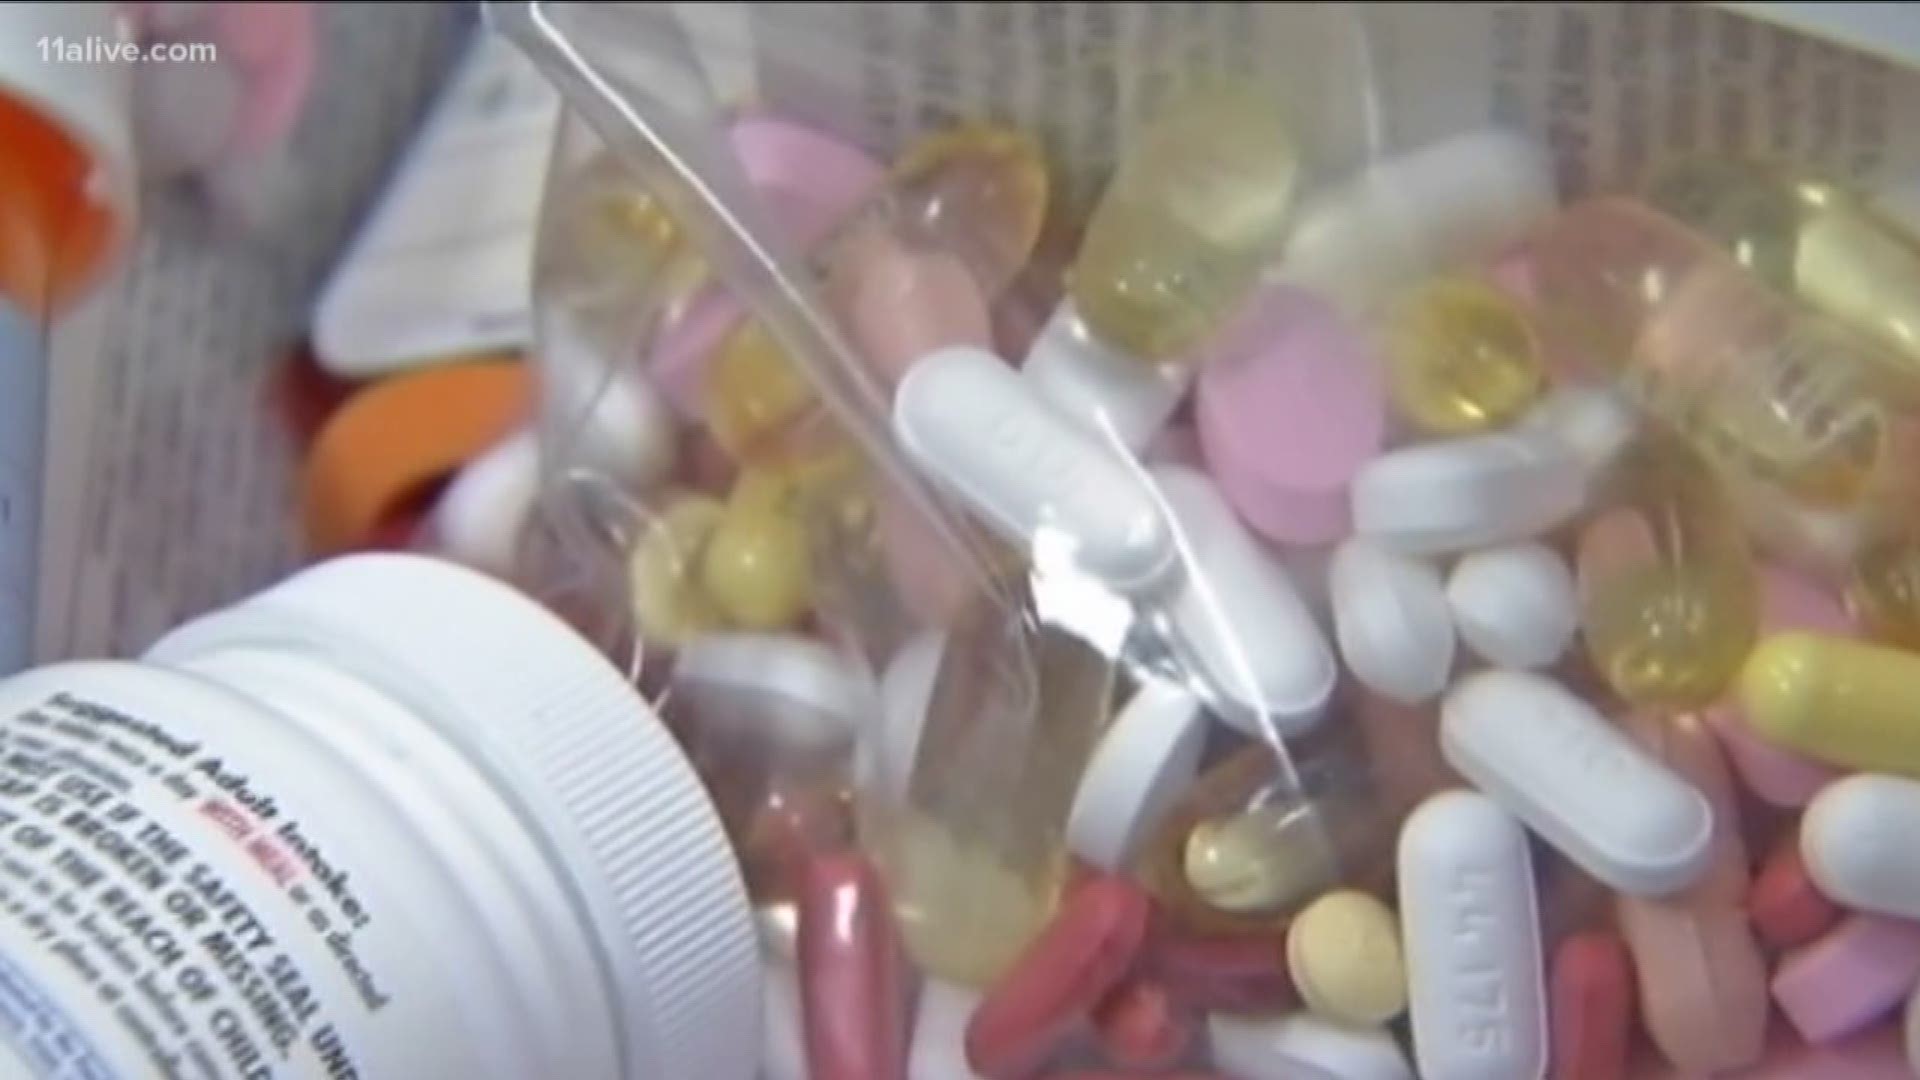 Opioid deaths have increased dramatically since 2013. 11Alive's Why Guy explains why the number of opioid deaths passed the number of traffic deaths in a single year.